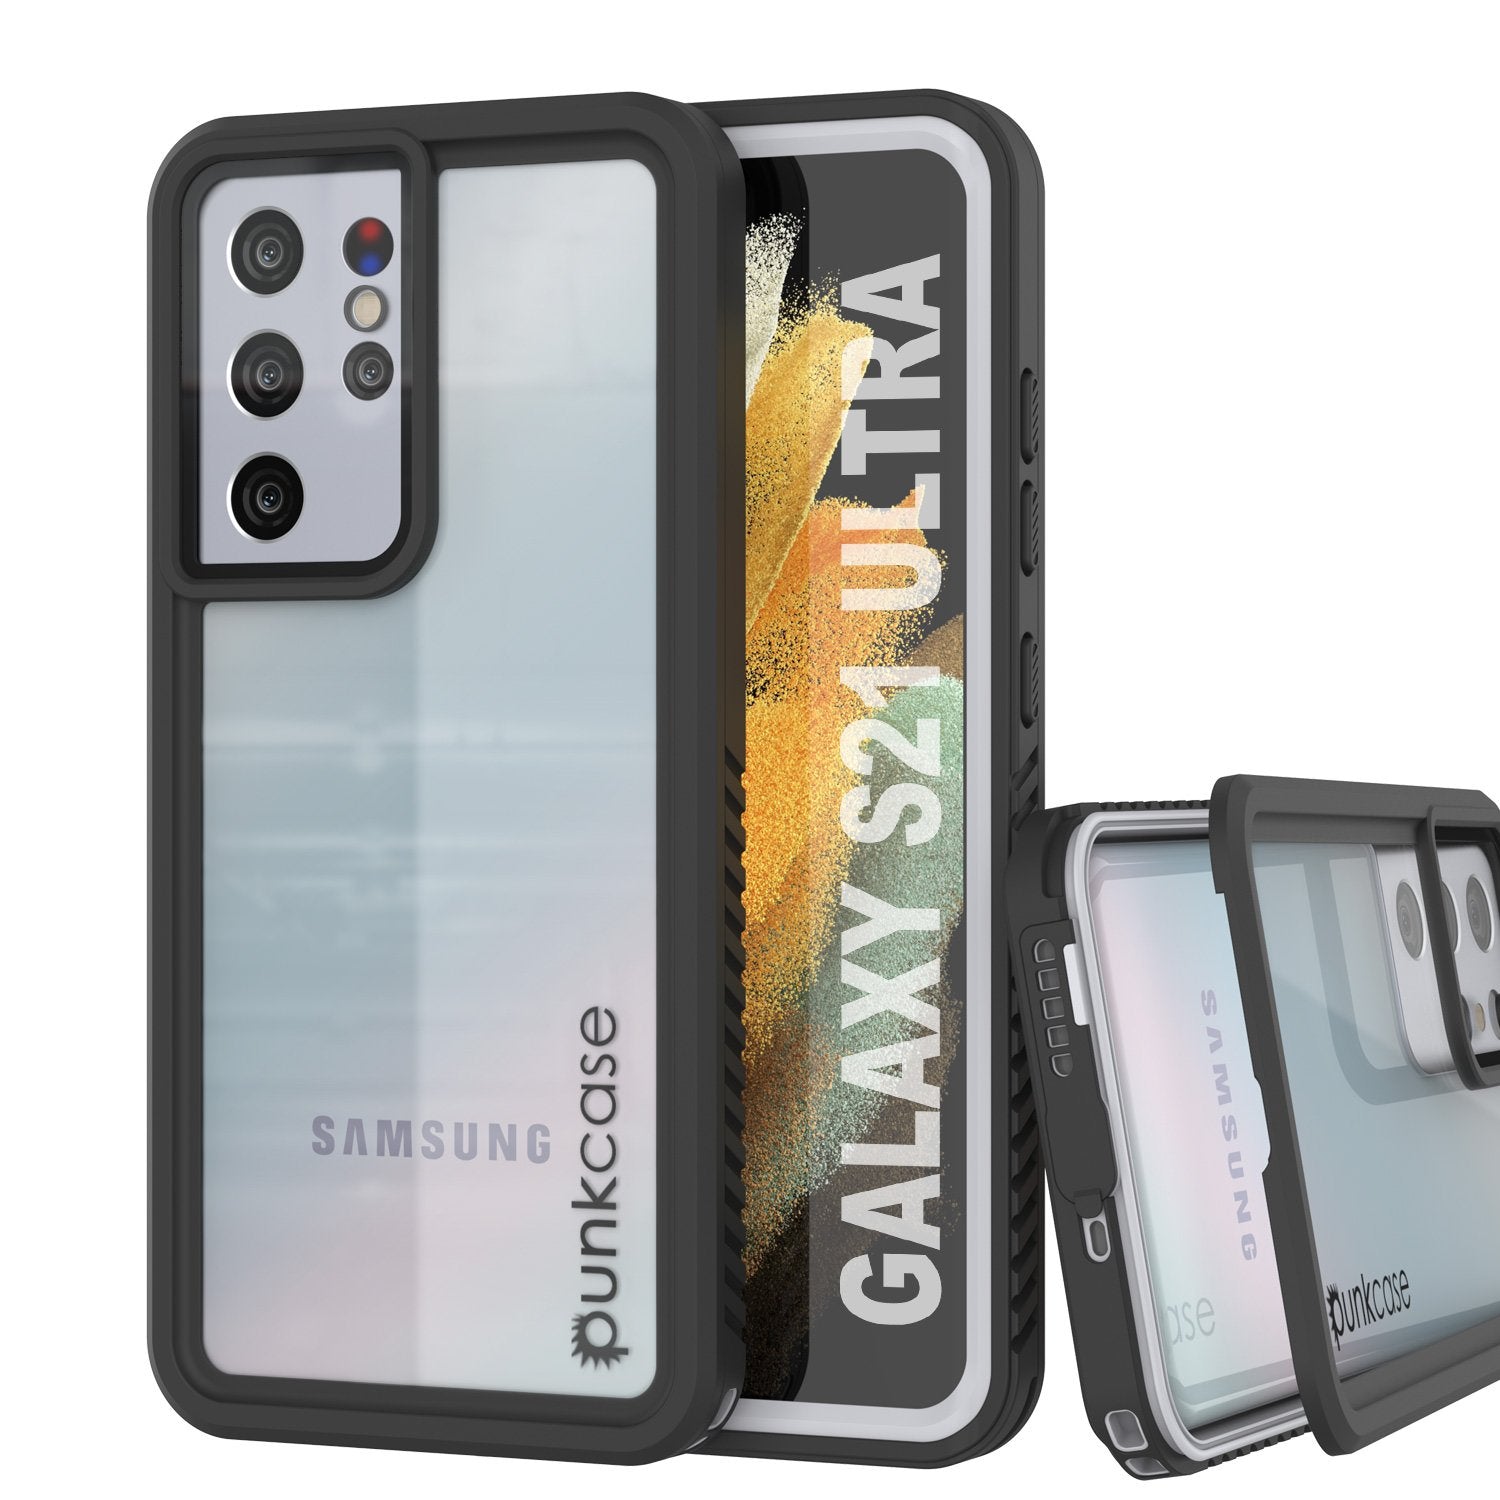 Galaxy S21 Ultra Water/Shock/Snow/dirt proof [Extreme Series] Punkcase Slim Case [White]